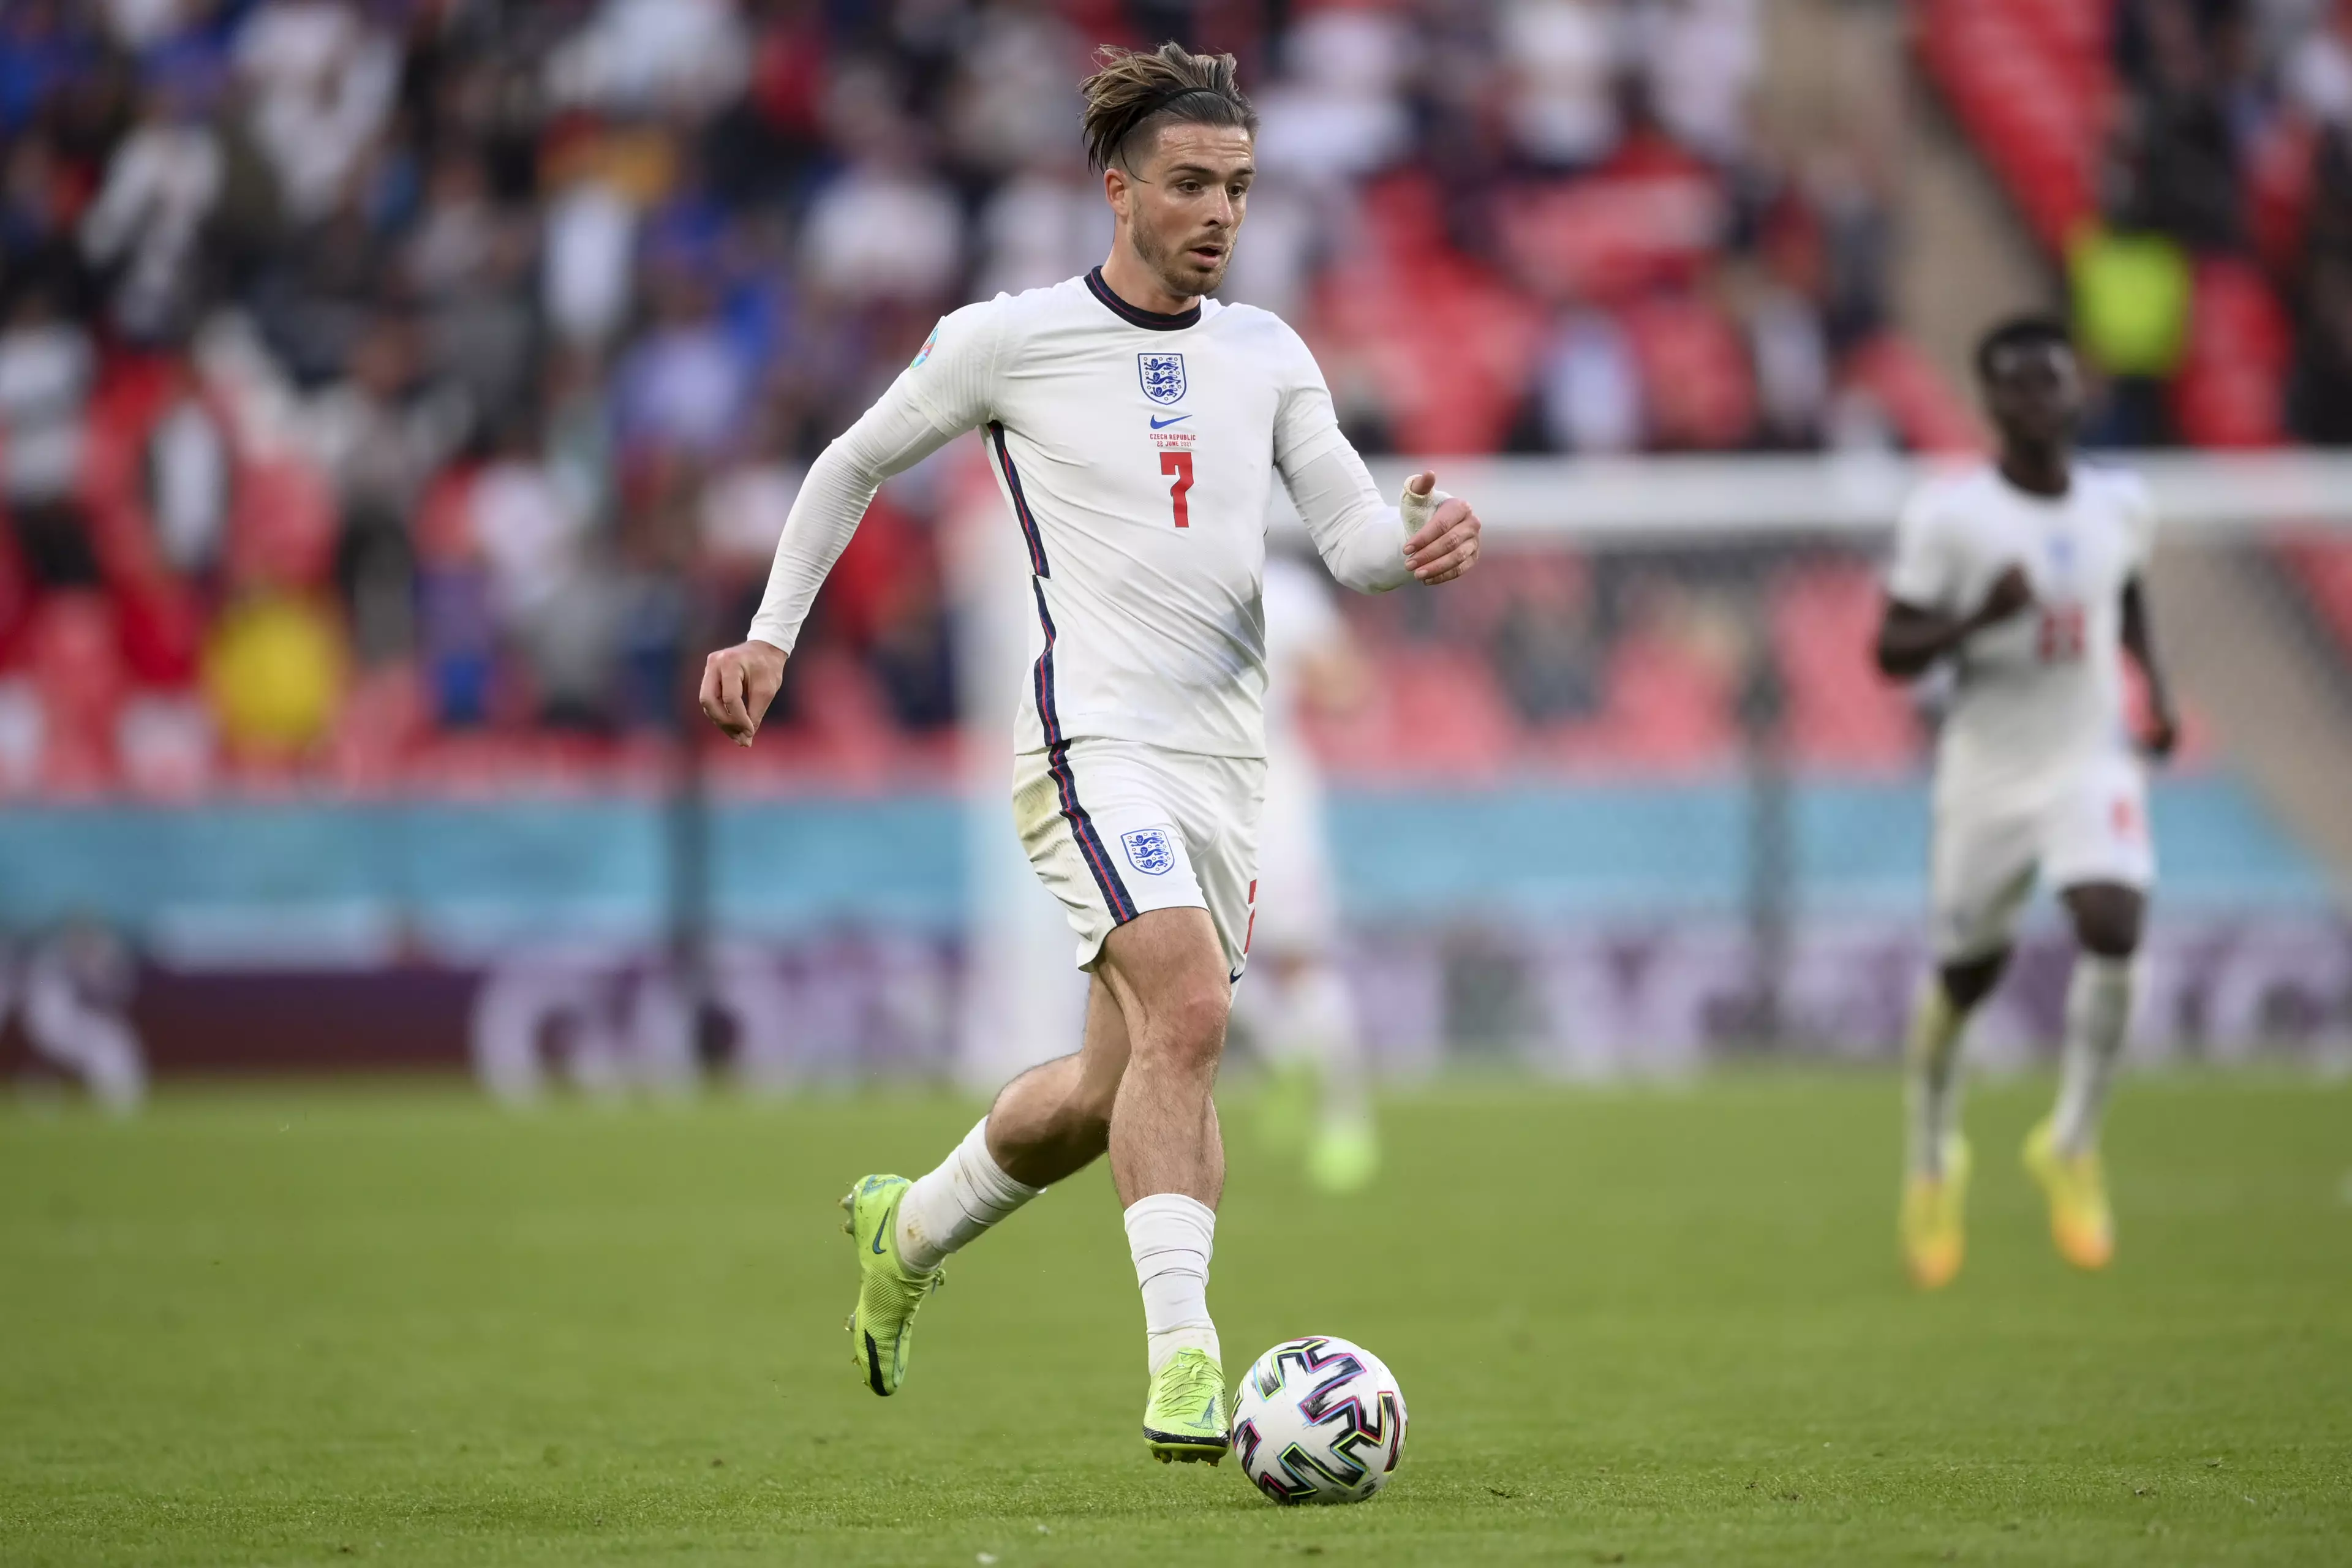 Grealish has impressed at the Euros. Image: PA Images